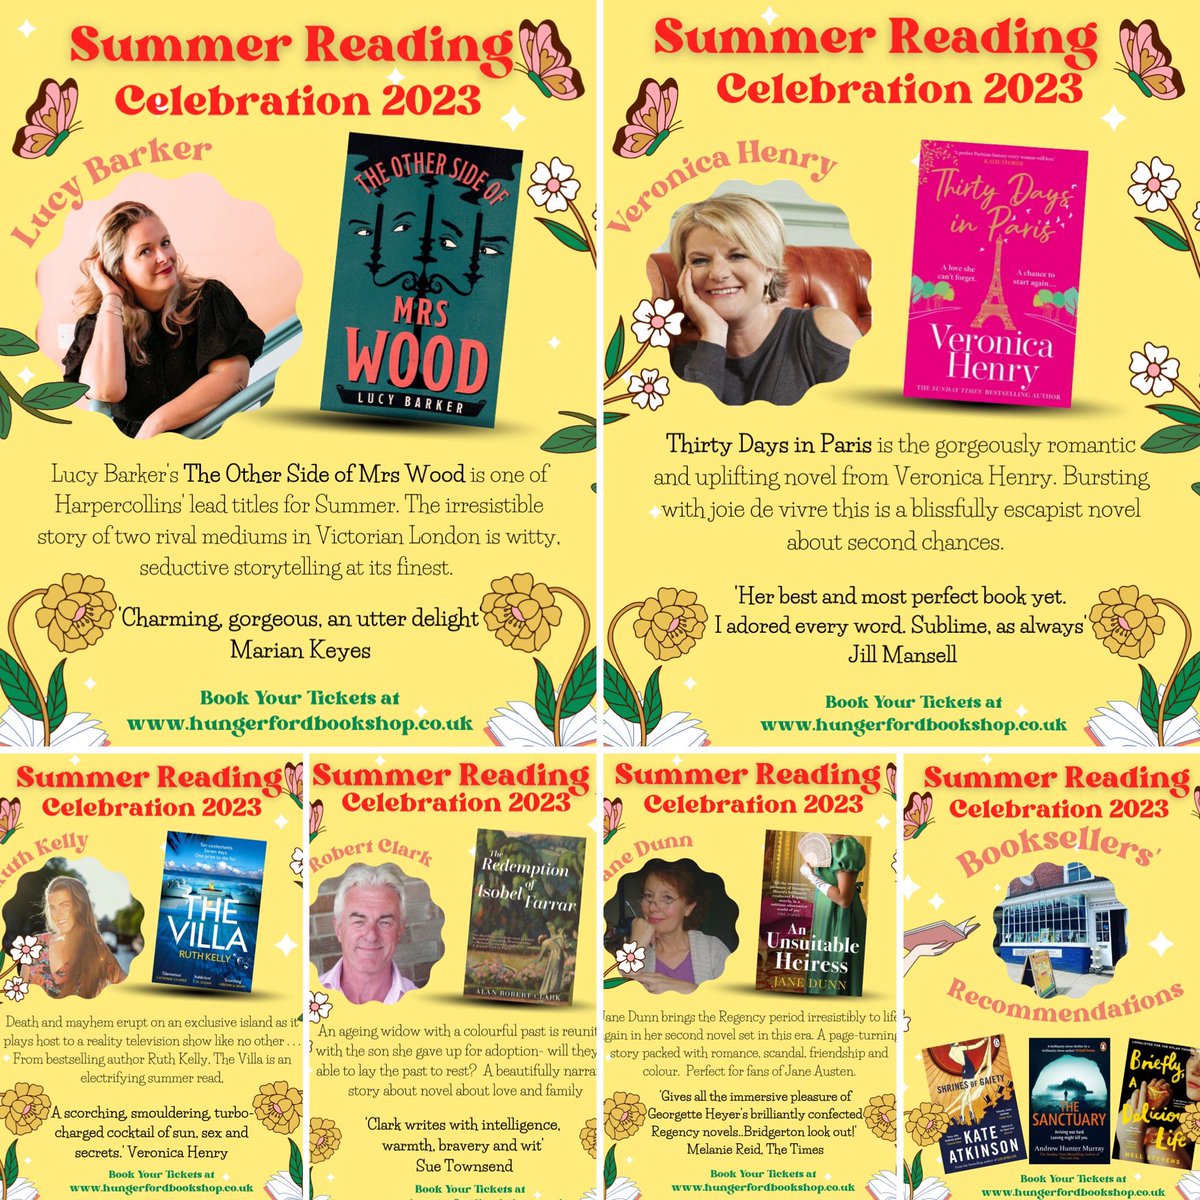 ✨ 10 days ✨until our annual Summer Reading Celebration with @lucysmallbark @veronica_henry @ruthywriter Alan Robert Clark & @JaneDunnAuthor + booksellers sharing their recent reads. Add in Pimms, wine, and nibbles and we’re in for a delightfully bookish evening! Book your tix!